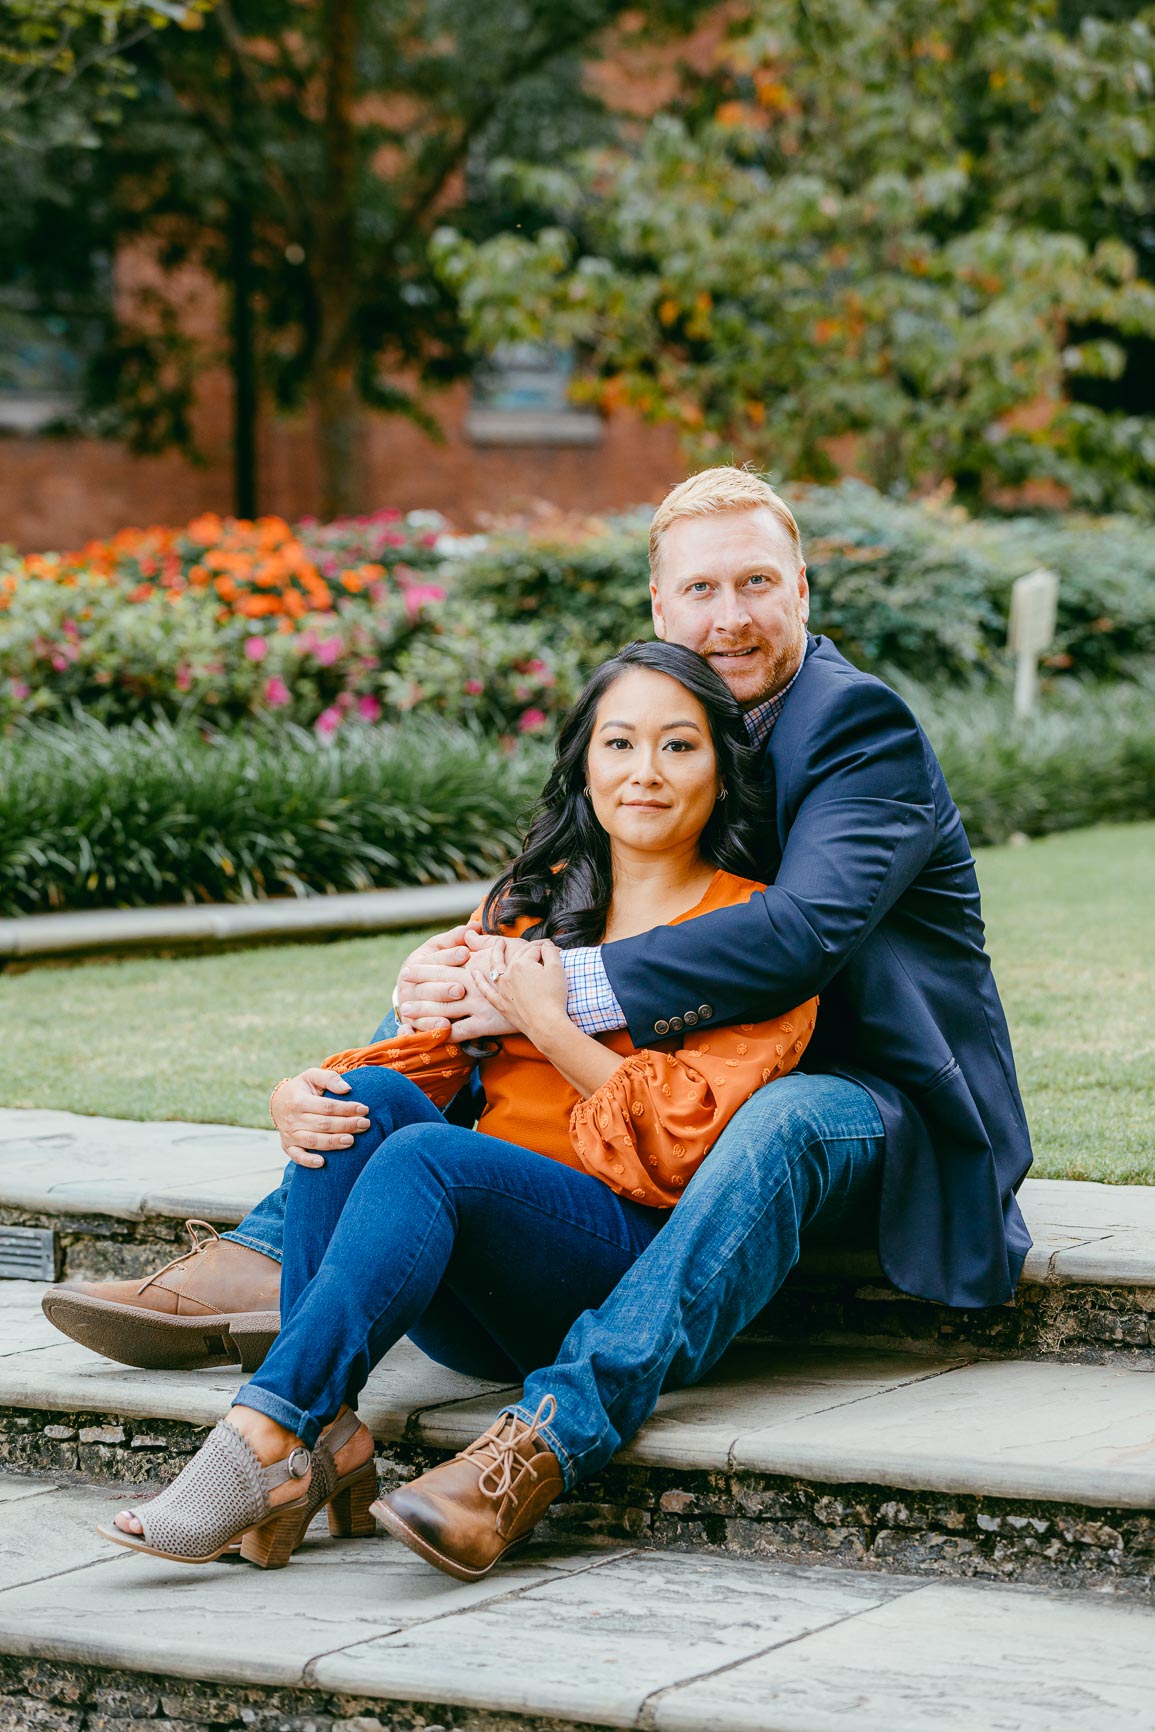 Uptown Charlotte engagement session at The Green shot by Nhieu Tang Photography | nhieutang.com